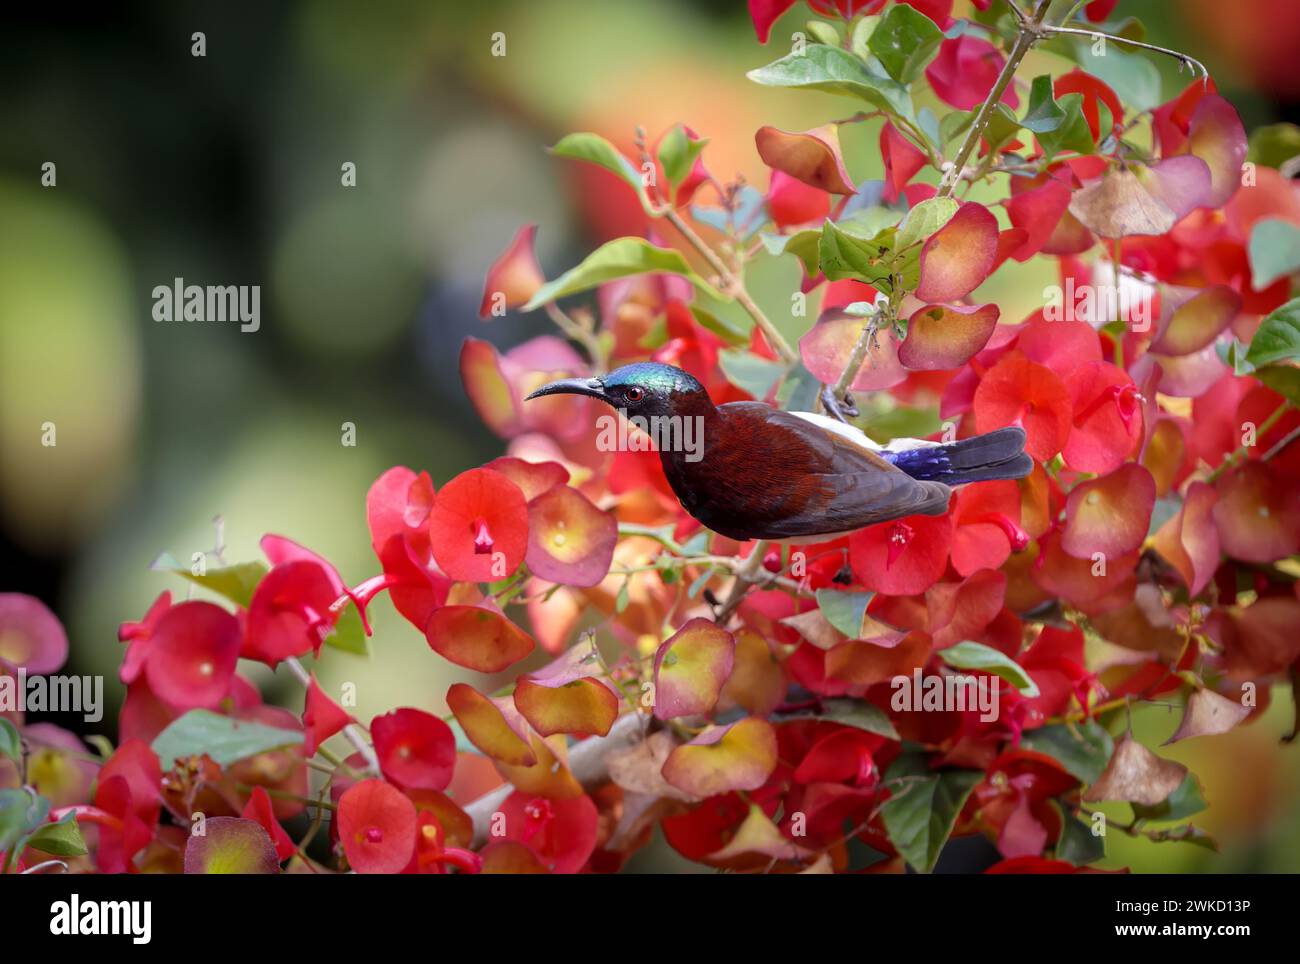 a purple rumped sunbird foraging on a flowering plant.purple-rumped sunbird is a sunbird endemic to the Indian Subcontinent. Stock Photo